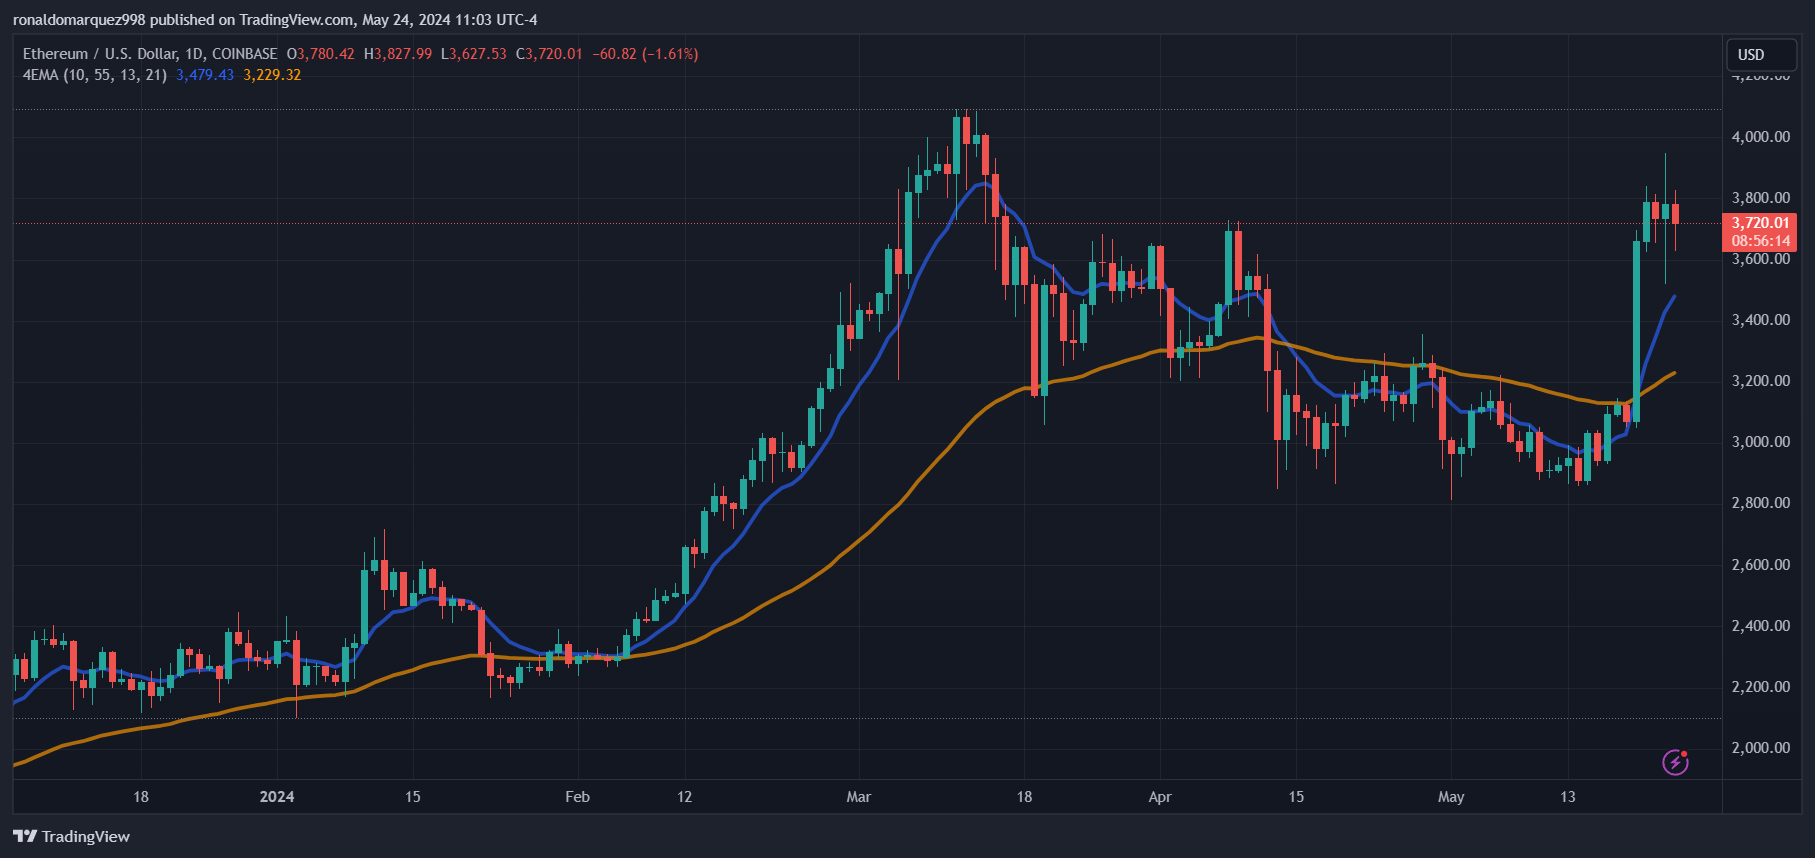 COINBASE:ETHUSD Chart Image by ronaldomarquez998